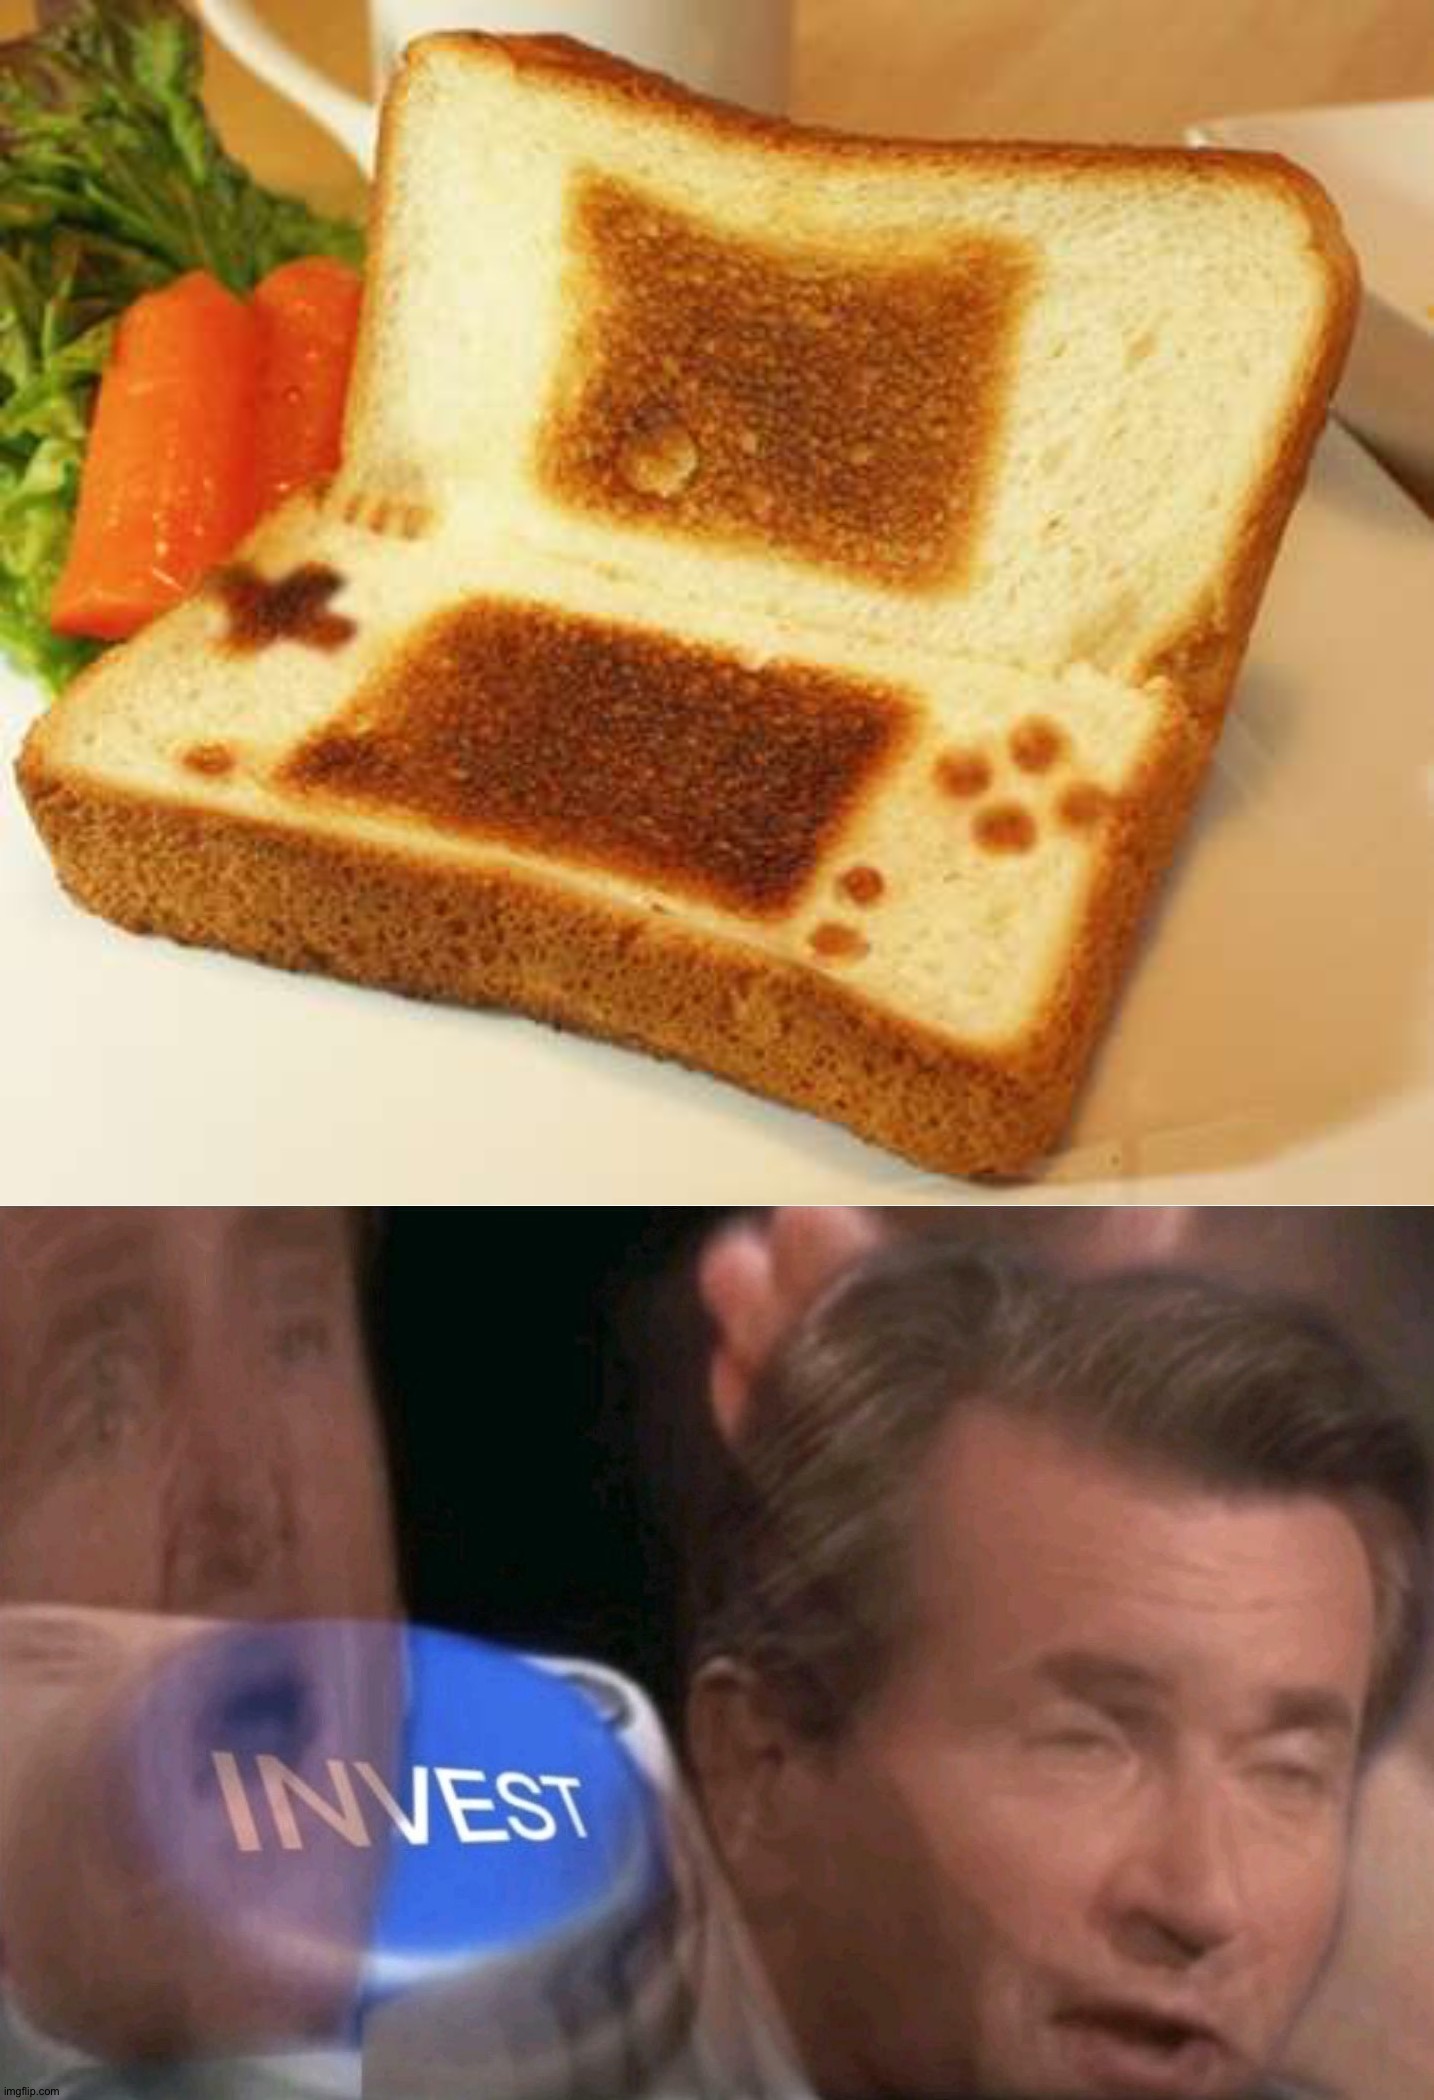 DS bread! | image tagged in invest,memes,funny,funny memes,ds,gaming | made w/ Imgflip meme maker